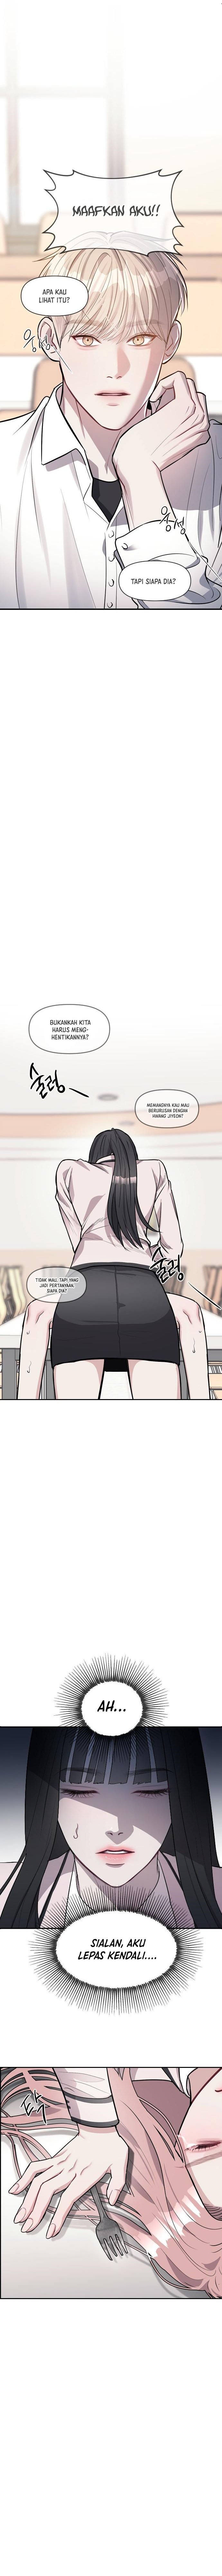 Undercover! Chaebol High School Chapter 01 - 193